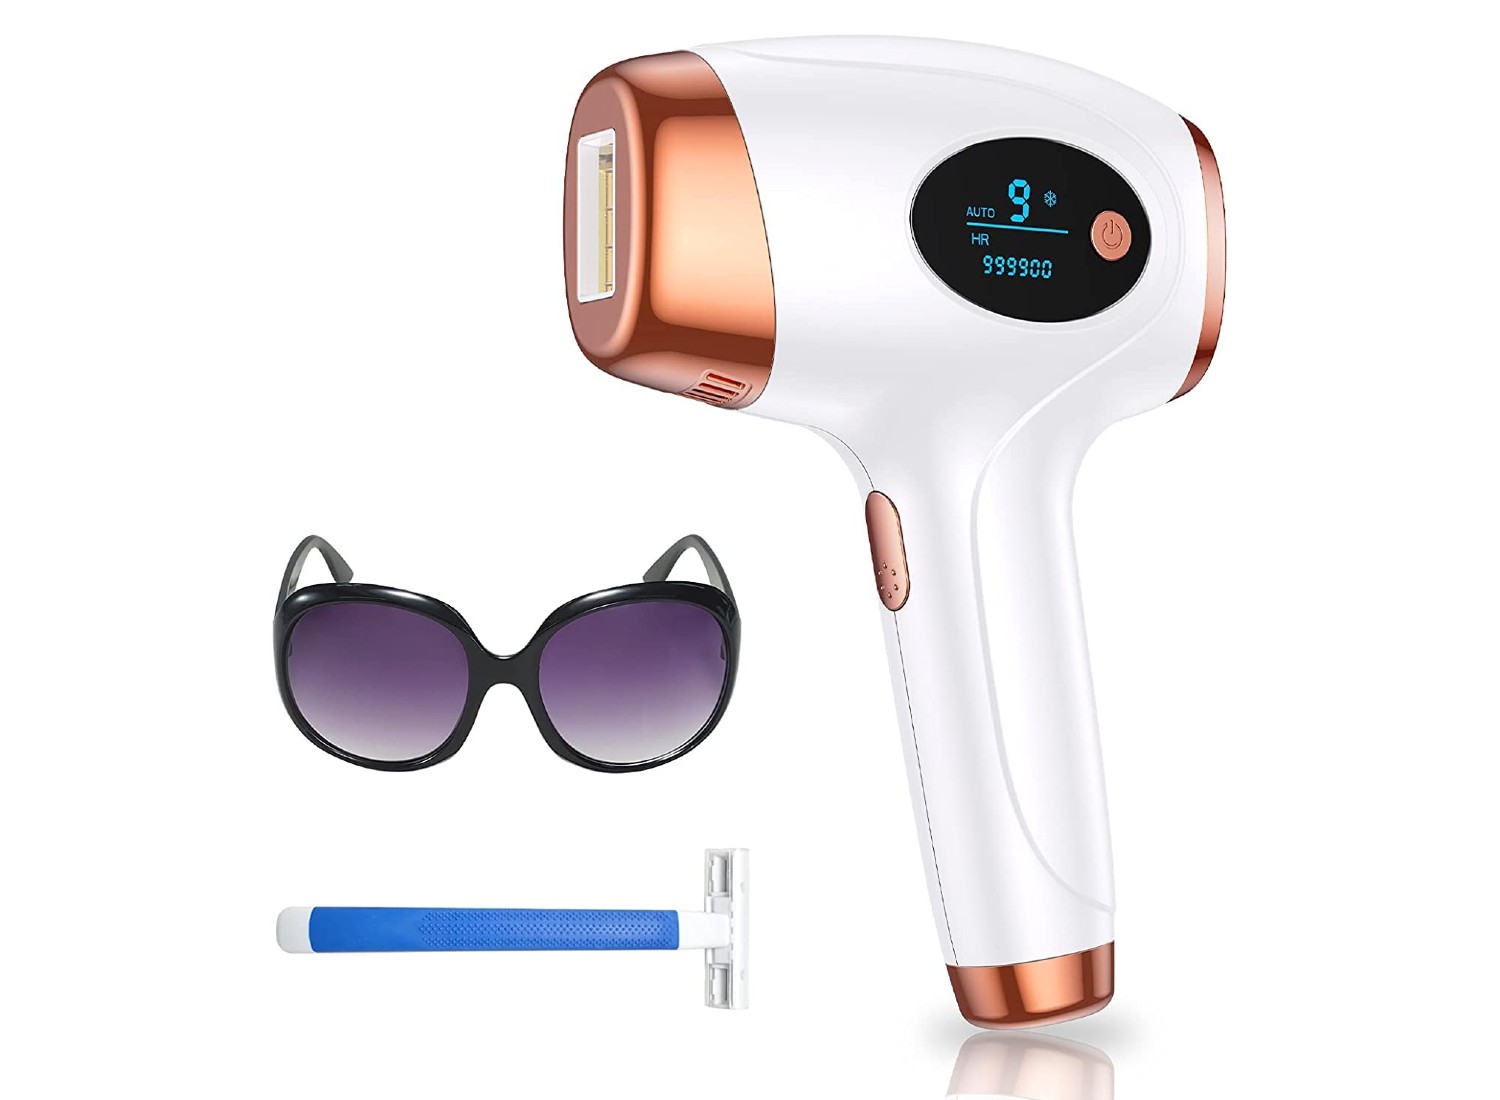 IPL Laser Hair Removal Device Only 4199 Shipped on Amazon  Over 2000  5Star Reviews  Hip2Save